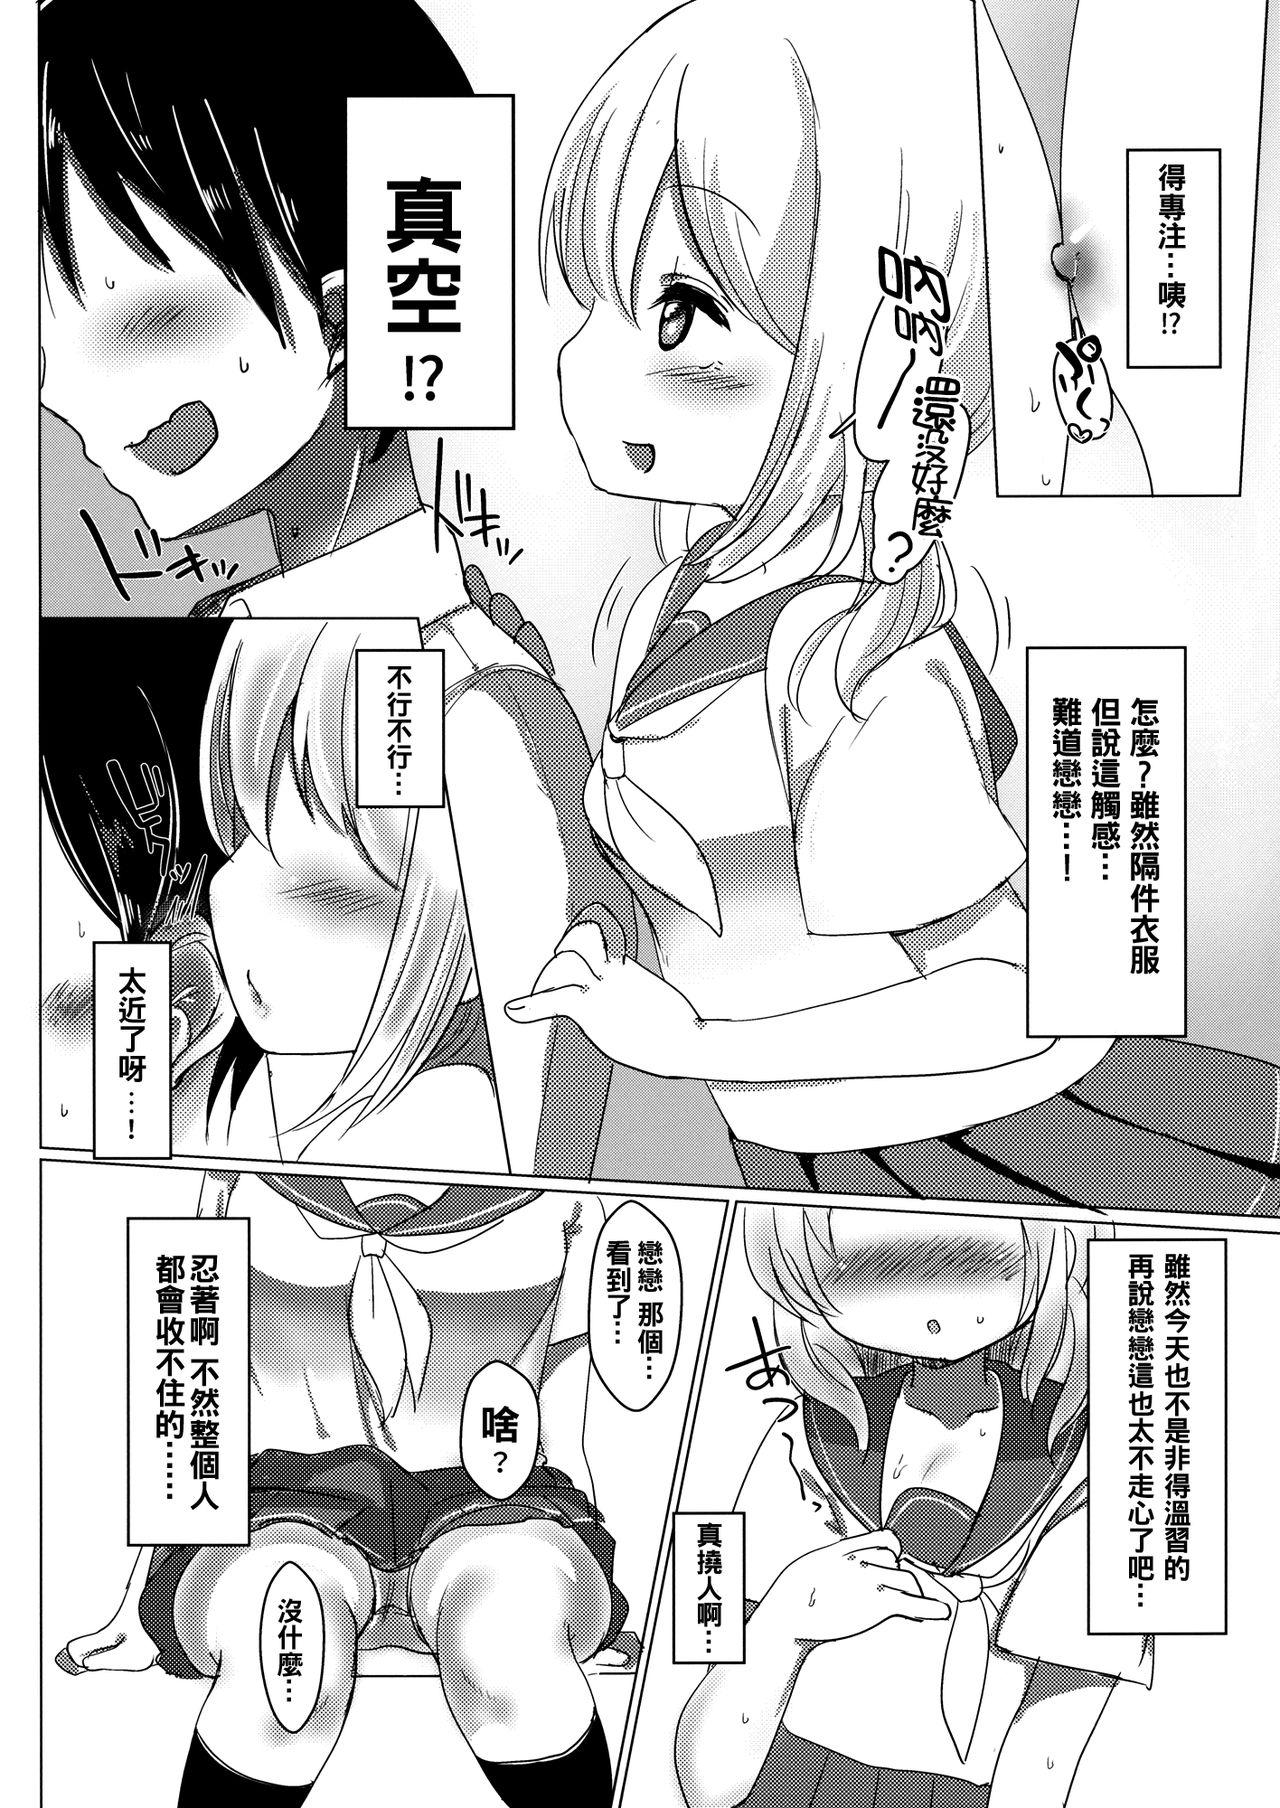 Transex JC Koishi to Houkago - Touhou project Making Love Porn - Page 6